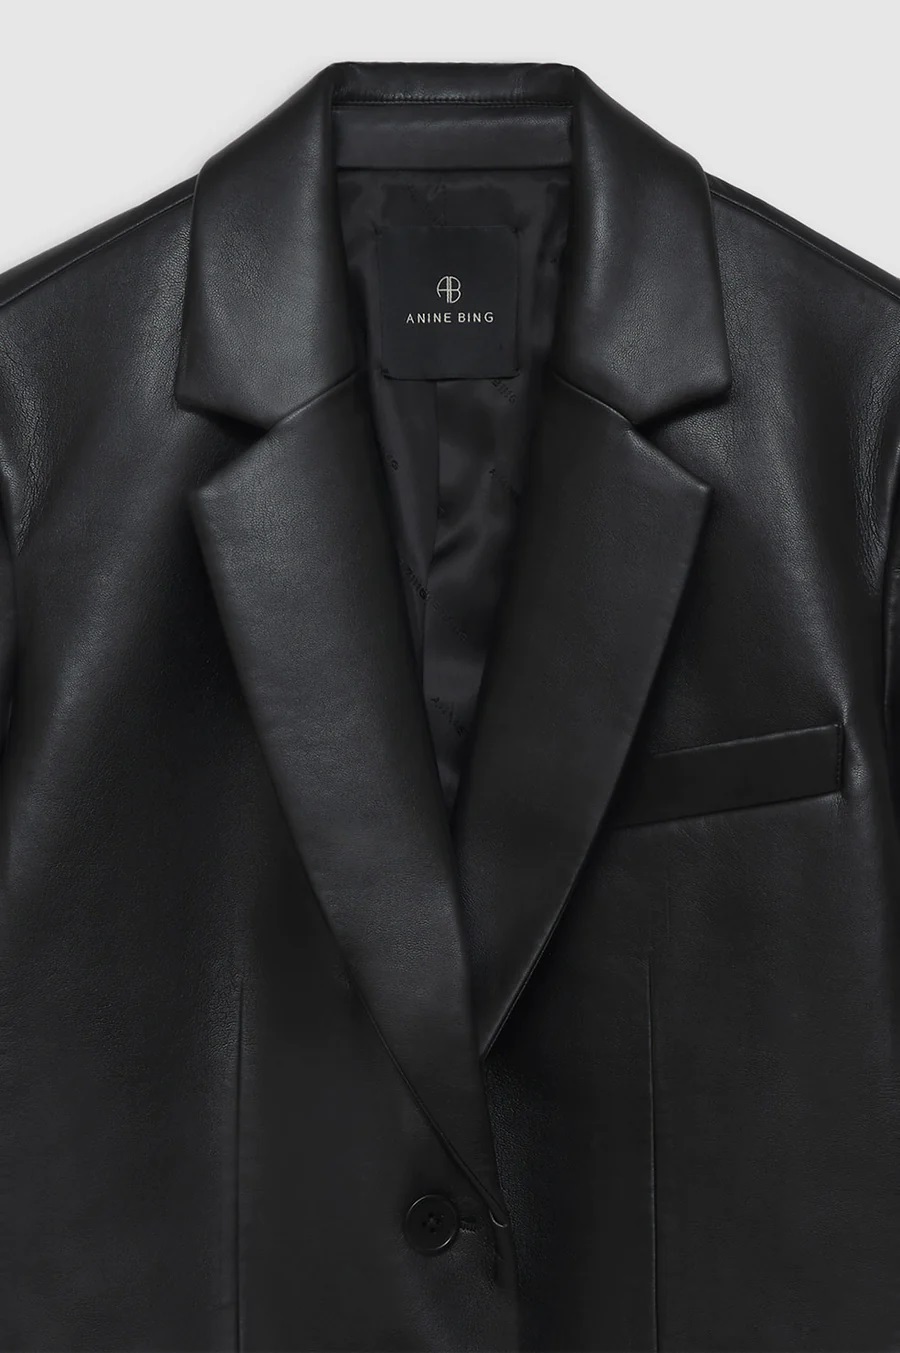 ANINE BING Classic Blazer in Black Recycled Leather XS